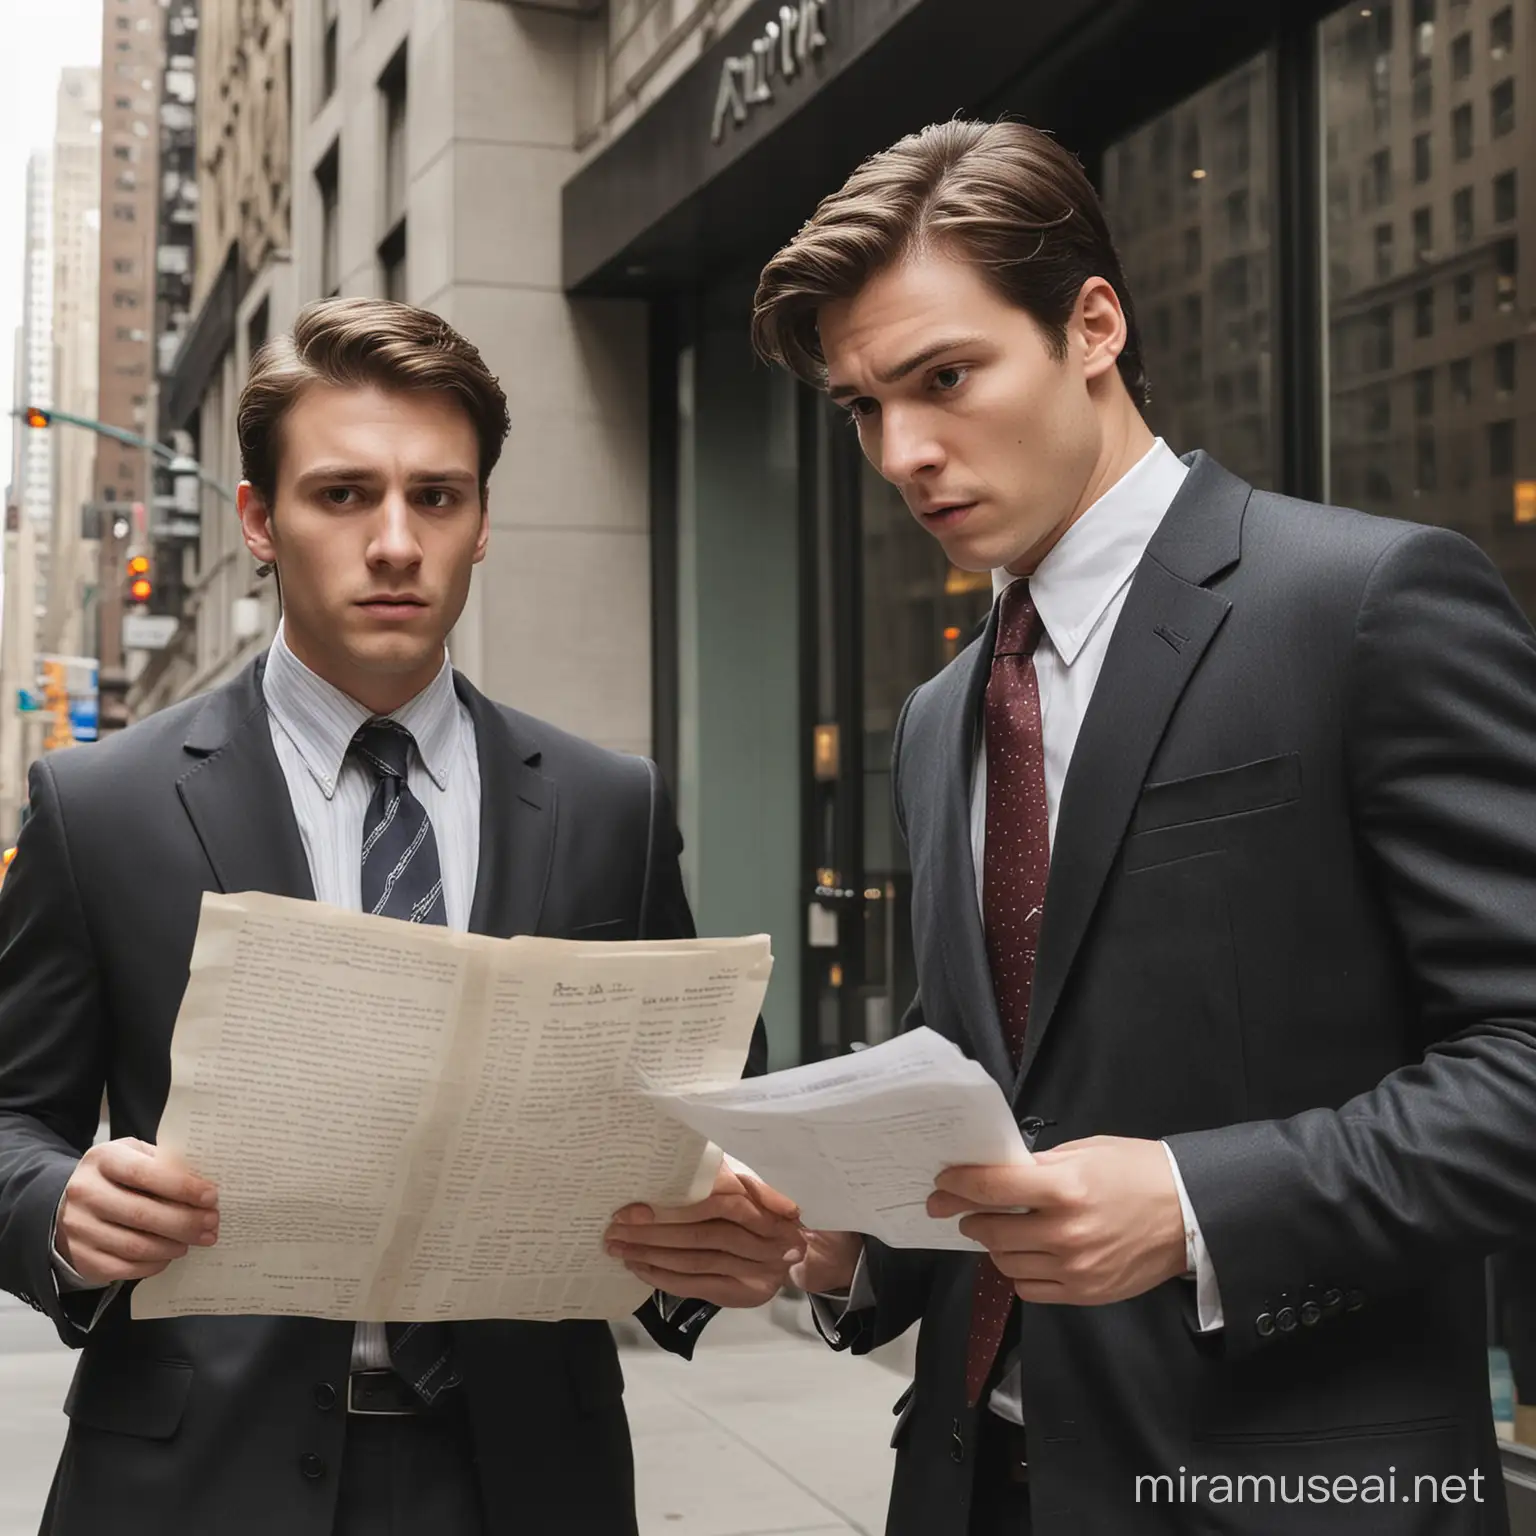 Brothers Alex and James Outside Financial Firm A Tale of Cautious Analysis and Rebellious Adventure